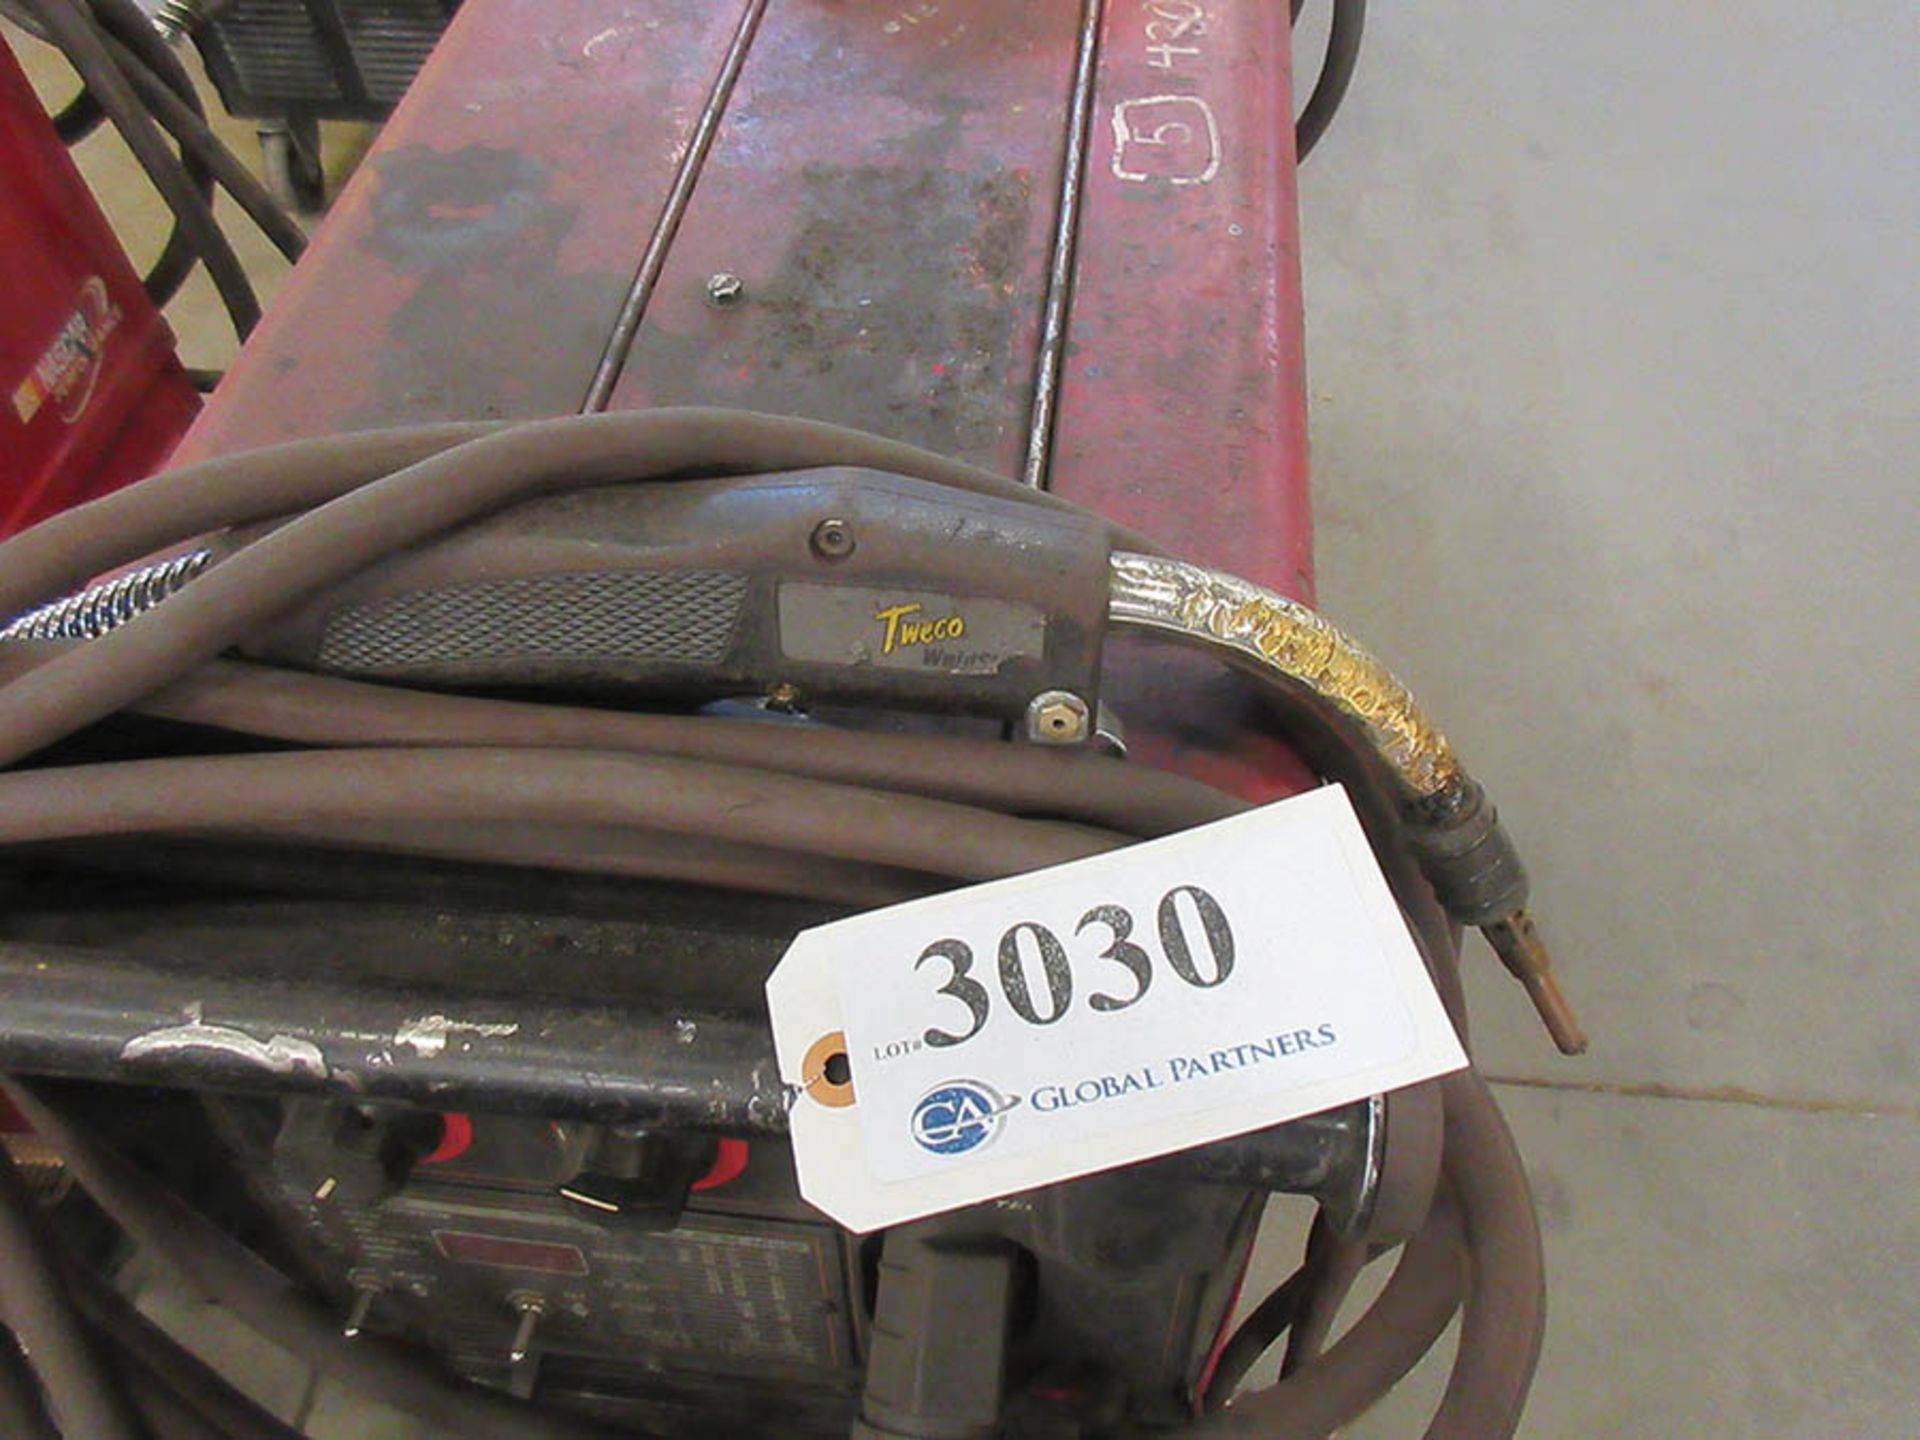 LINCOLN ELECTRIC 350MP POWER MIG WELDER WITH TWECO WELDSKILL MIG GUN, #44 - Image 3 of 3